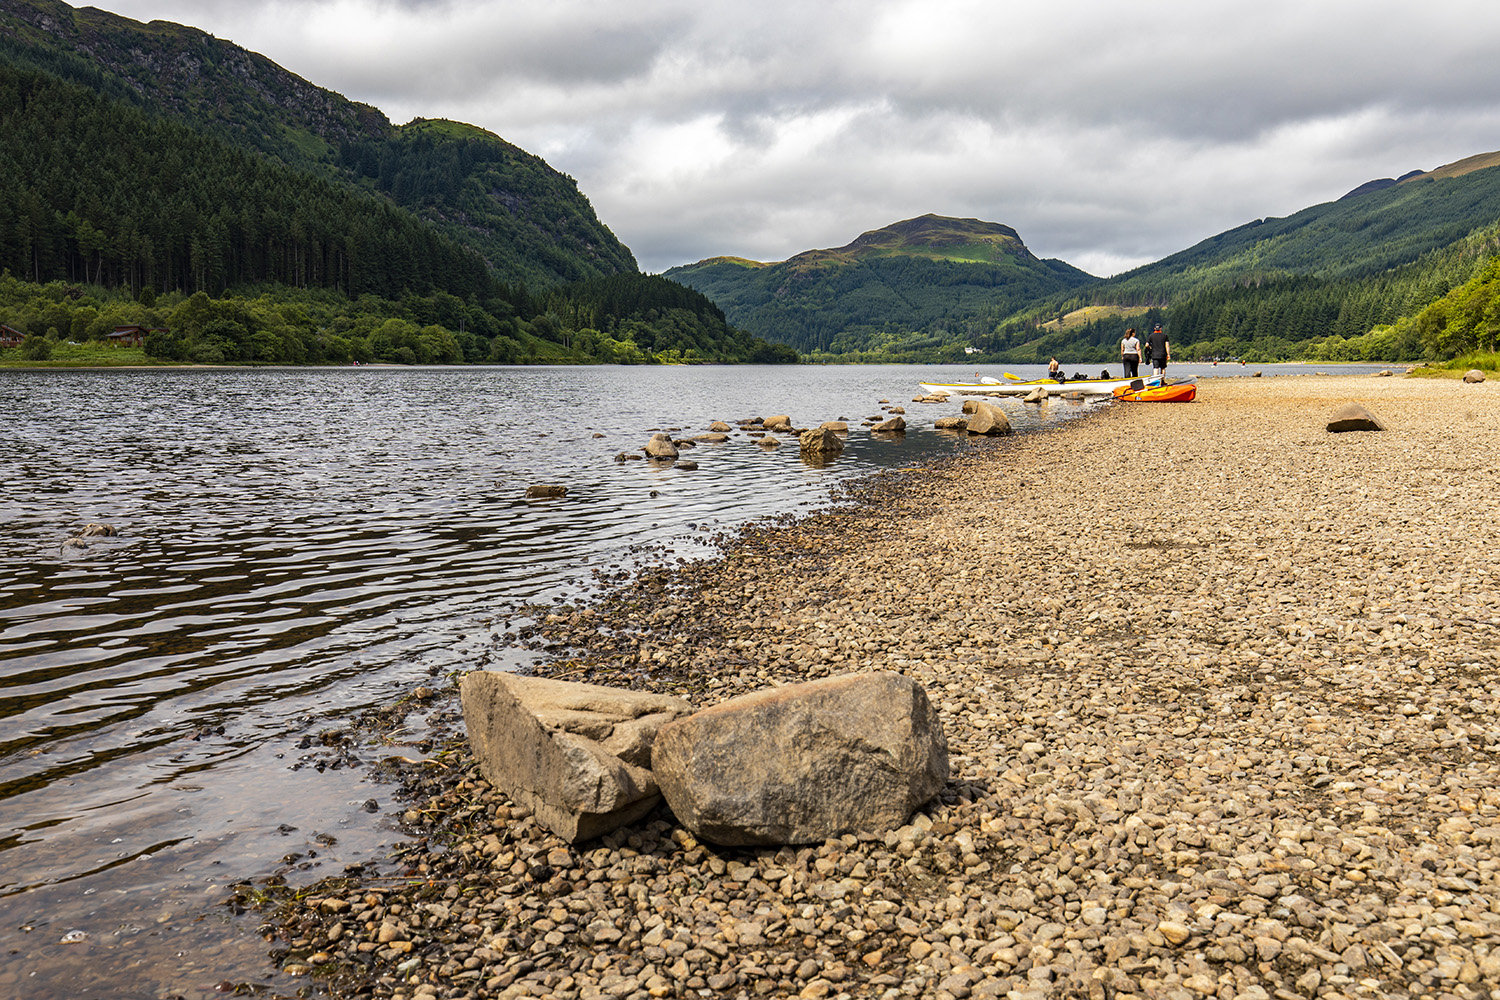 View of Loch Lubnaig on the way to Oban